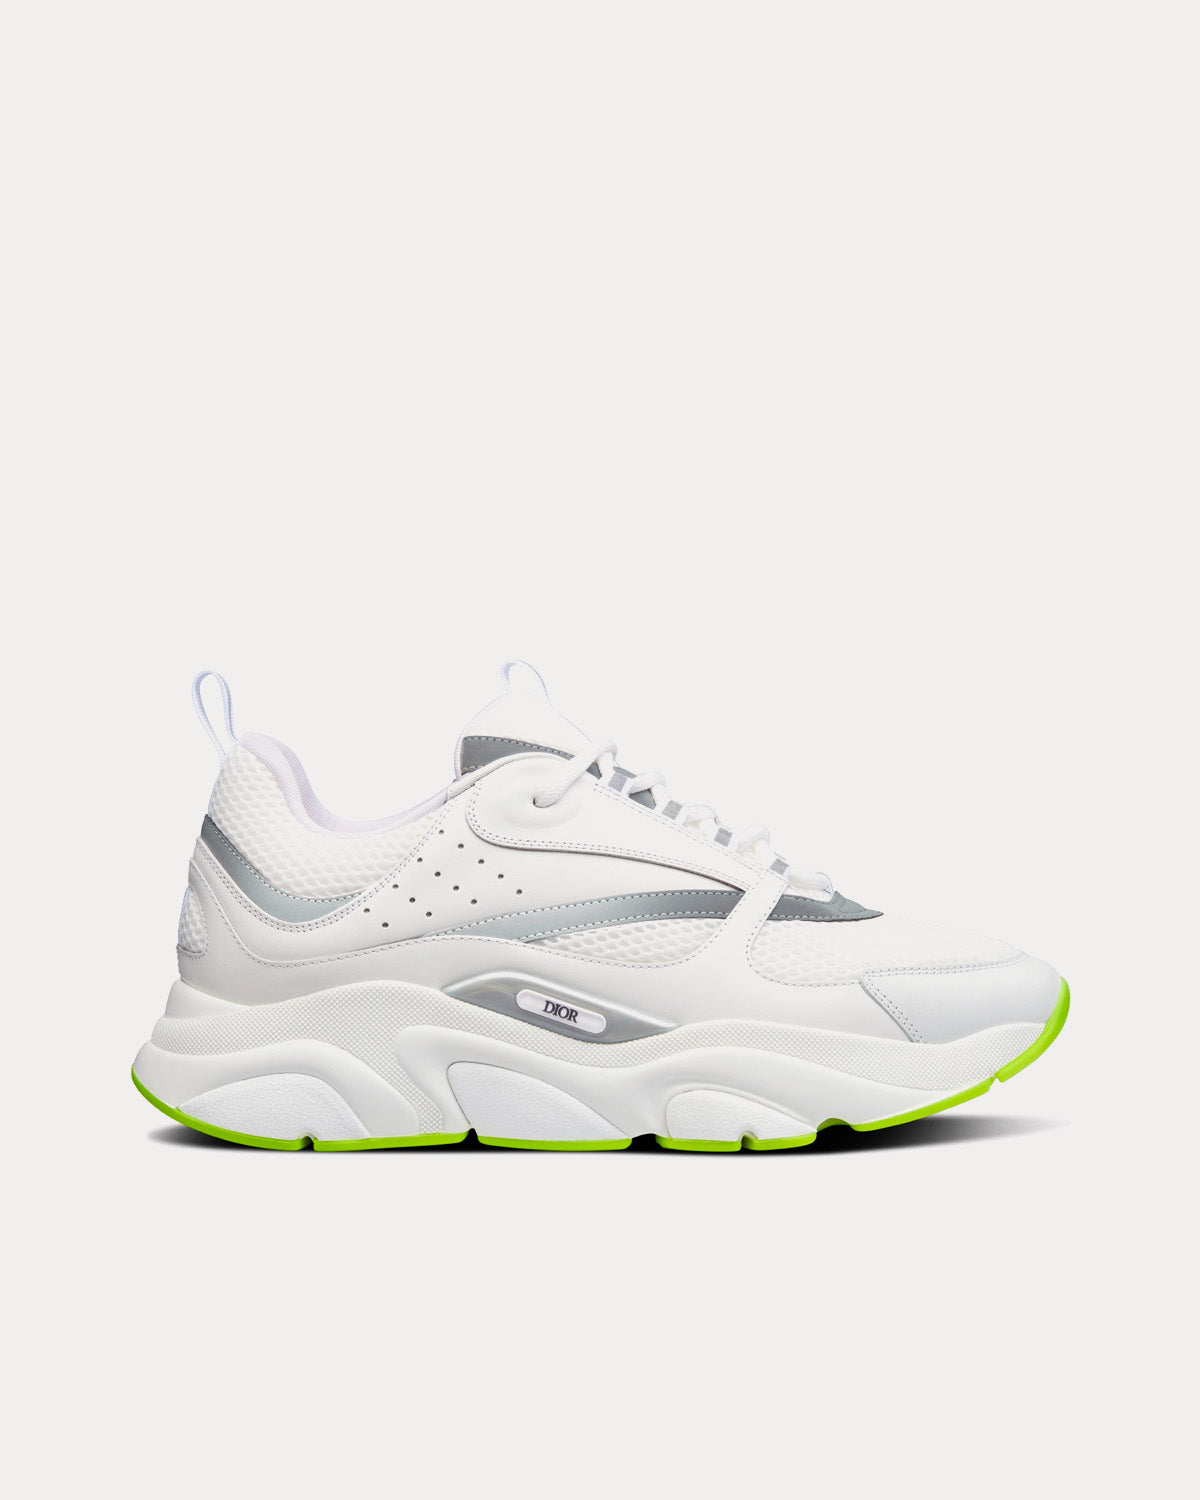 Dior B22 Sneaker Cream And White Technical Mesh With Olive